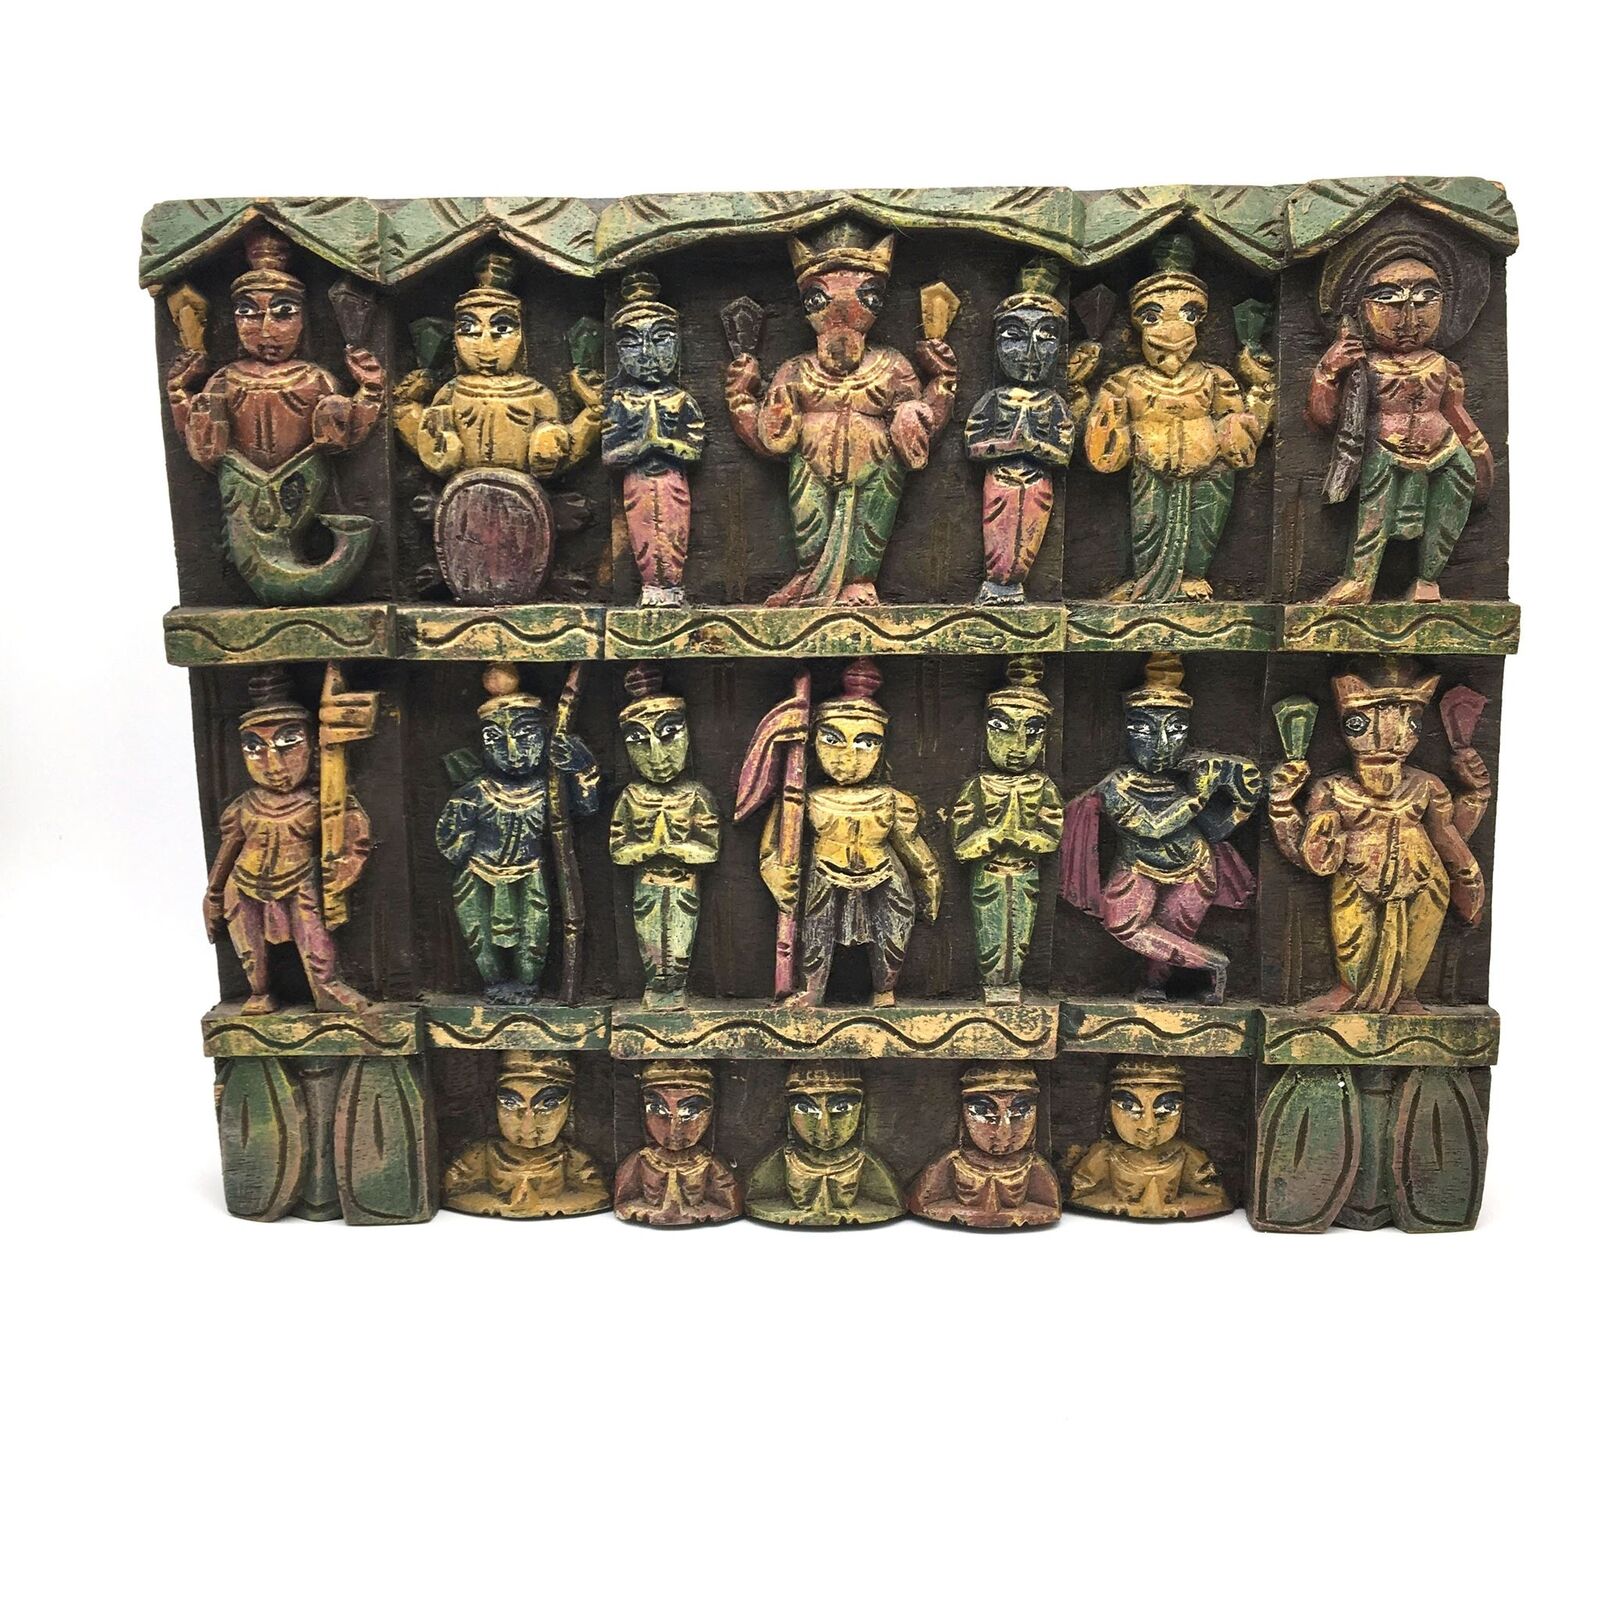 Hand-carved India Colorful Decorative Solid Wood Wall Hanging Panel Plaque 5.6